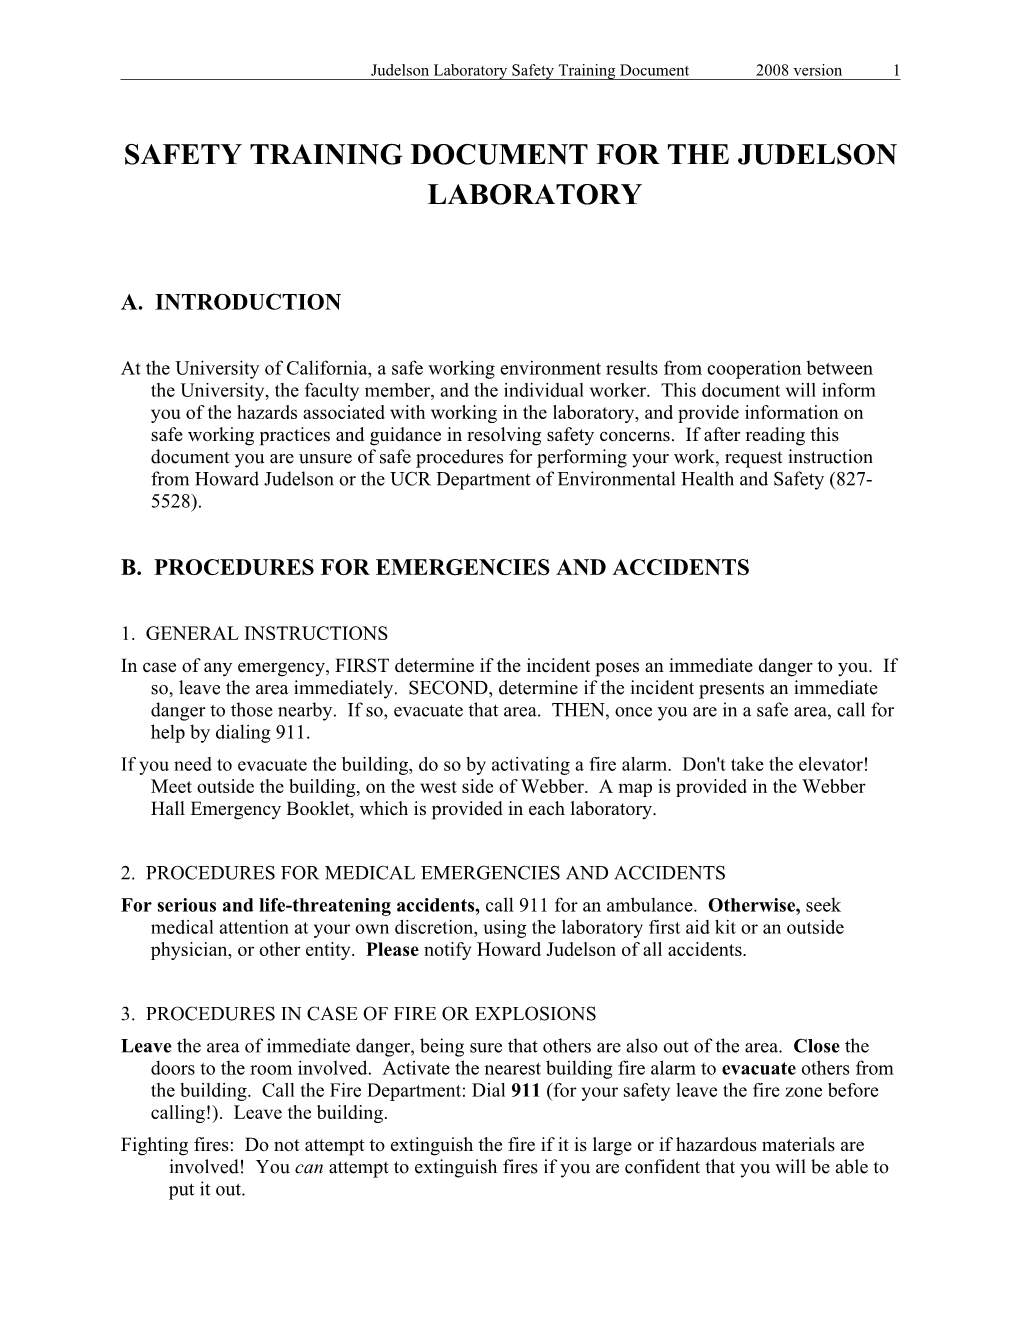 Safety Training Document for the Judelson Laboratory